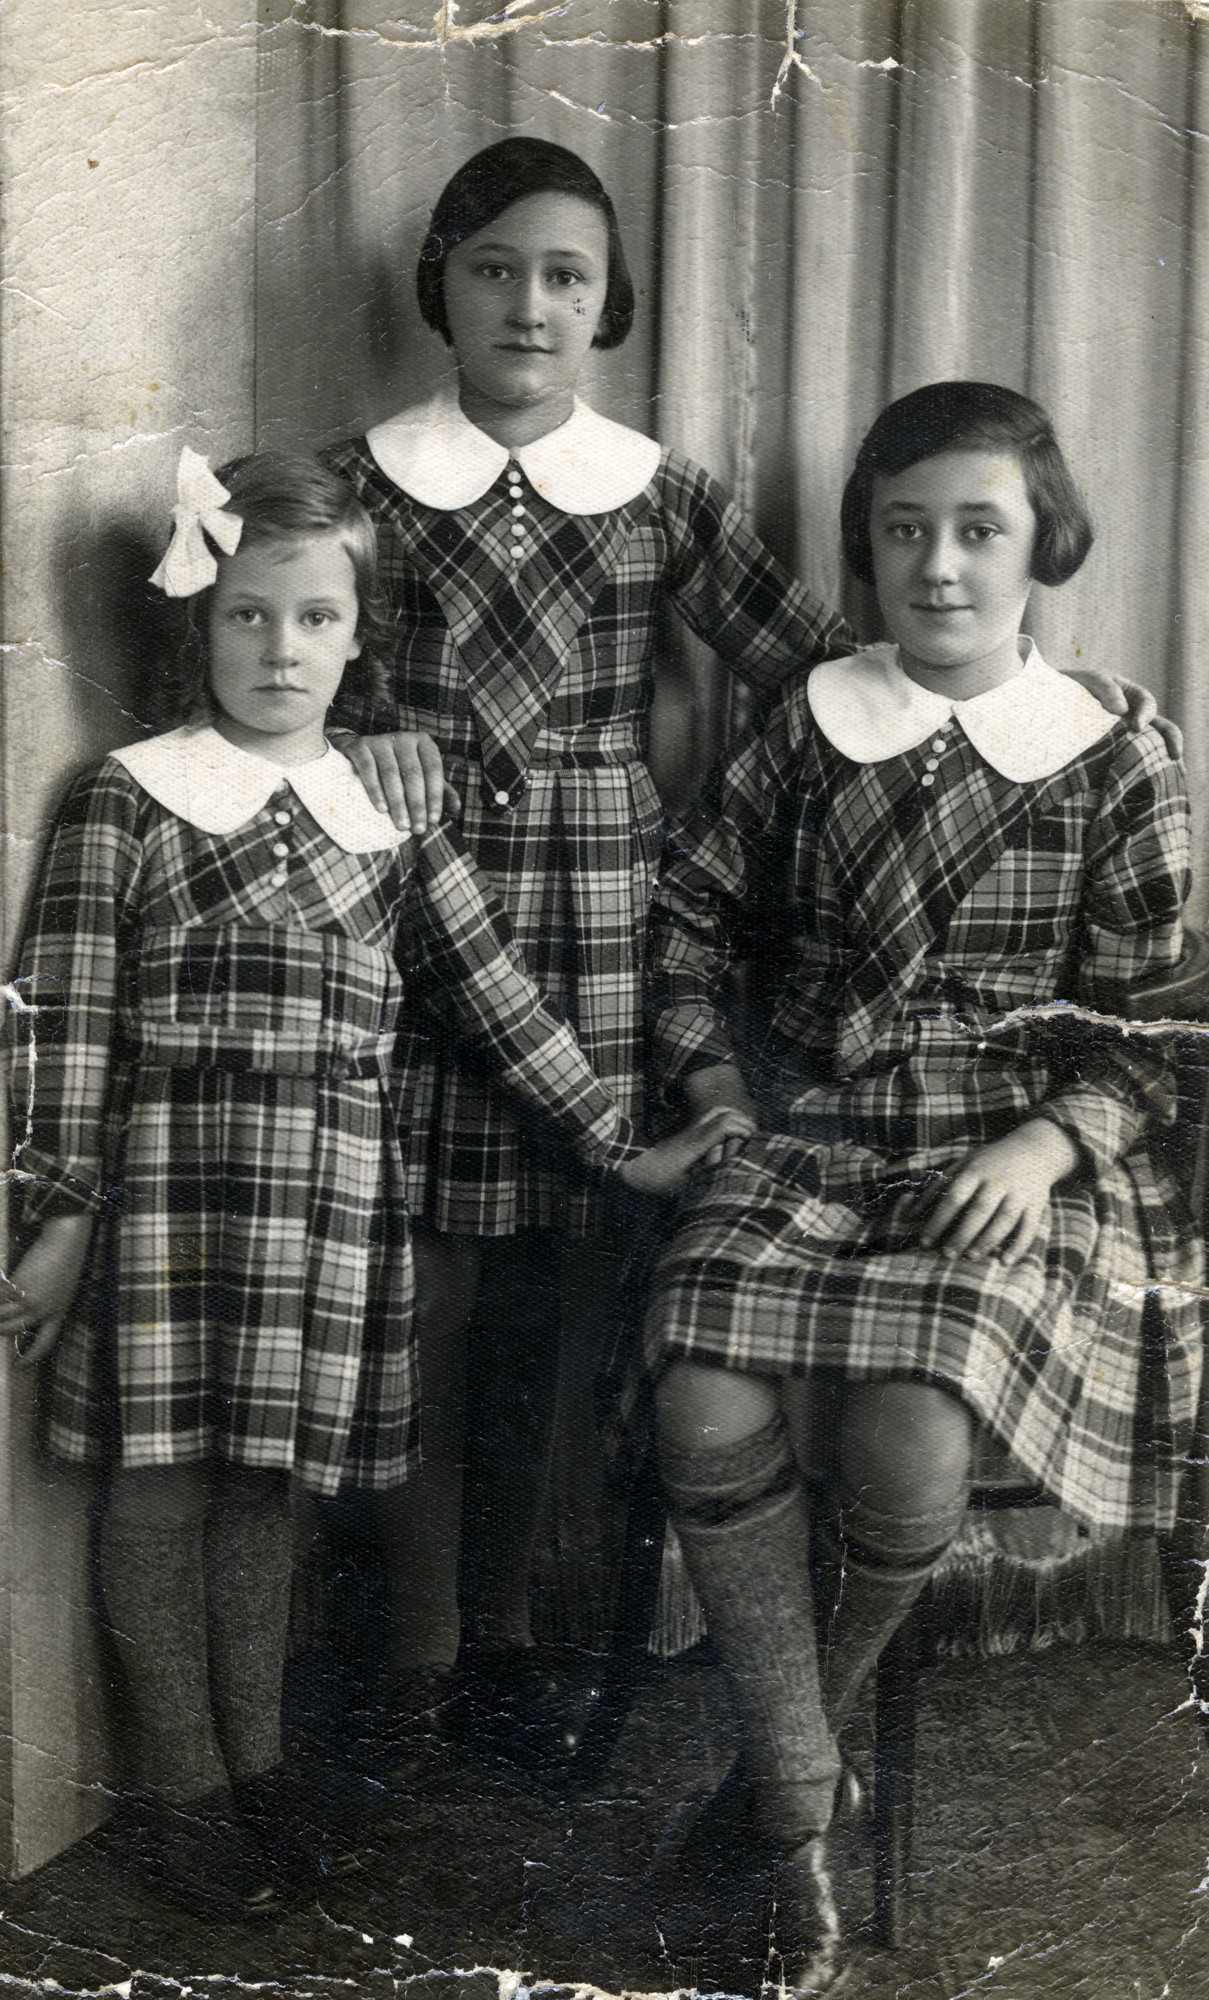 Belgian Jewish sisters wearing matching dresses pose for a photograph before Pesach (Passover).

Pictured from left to right are Naomi, Eva, and Rachell Isboutsky.